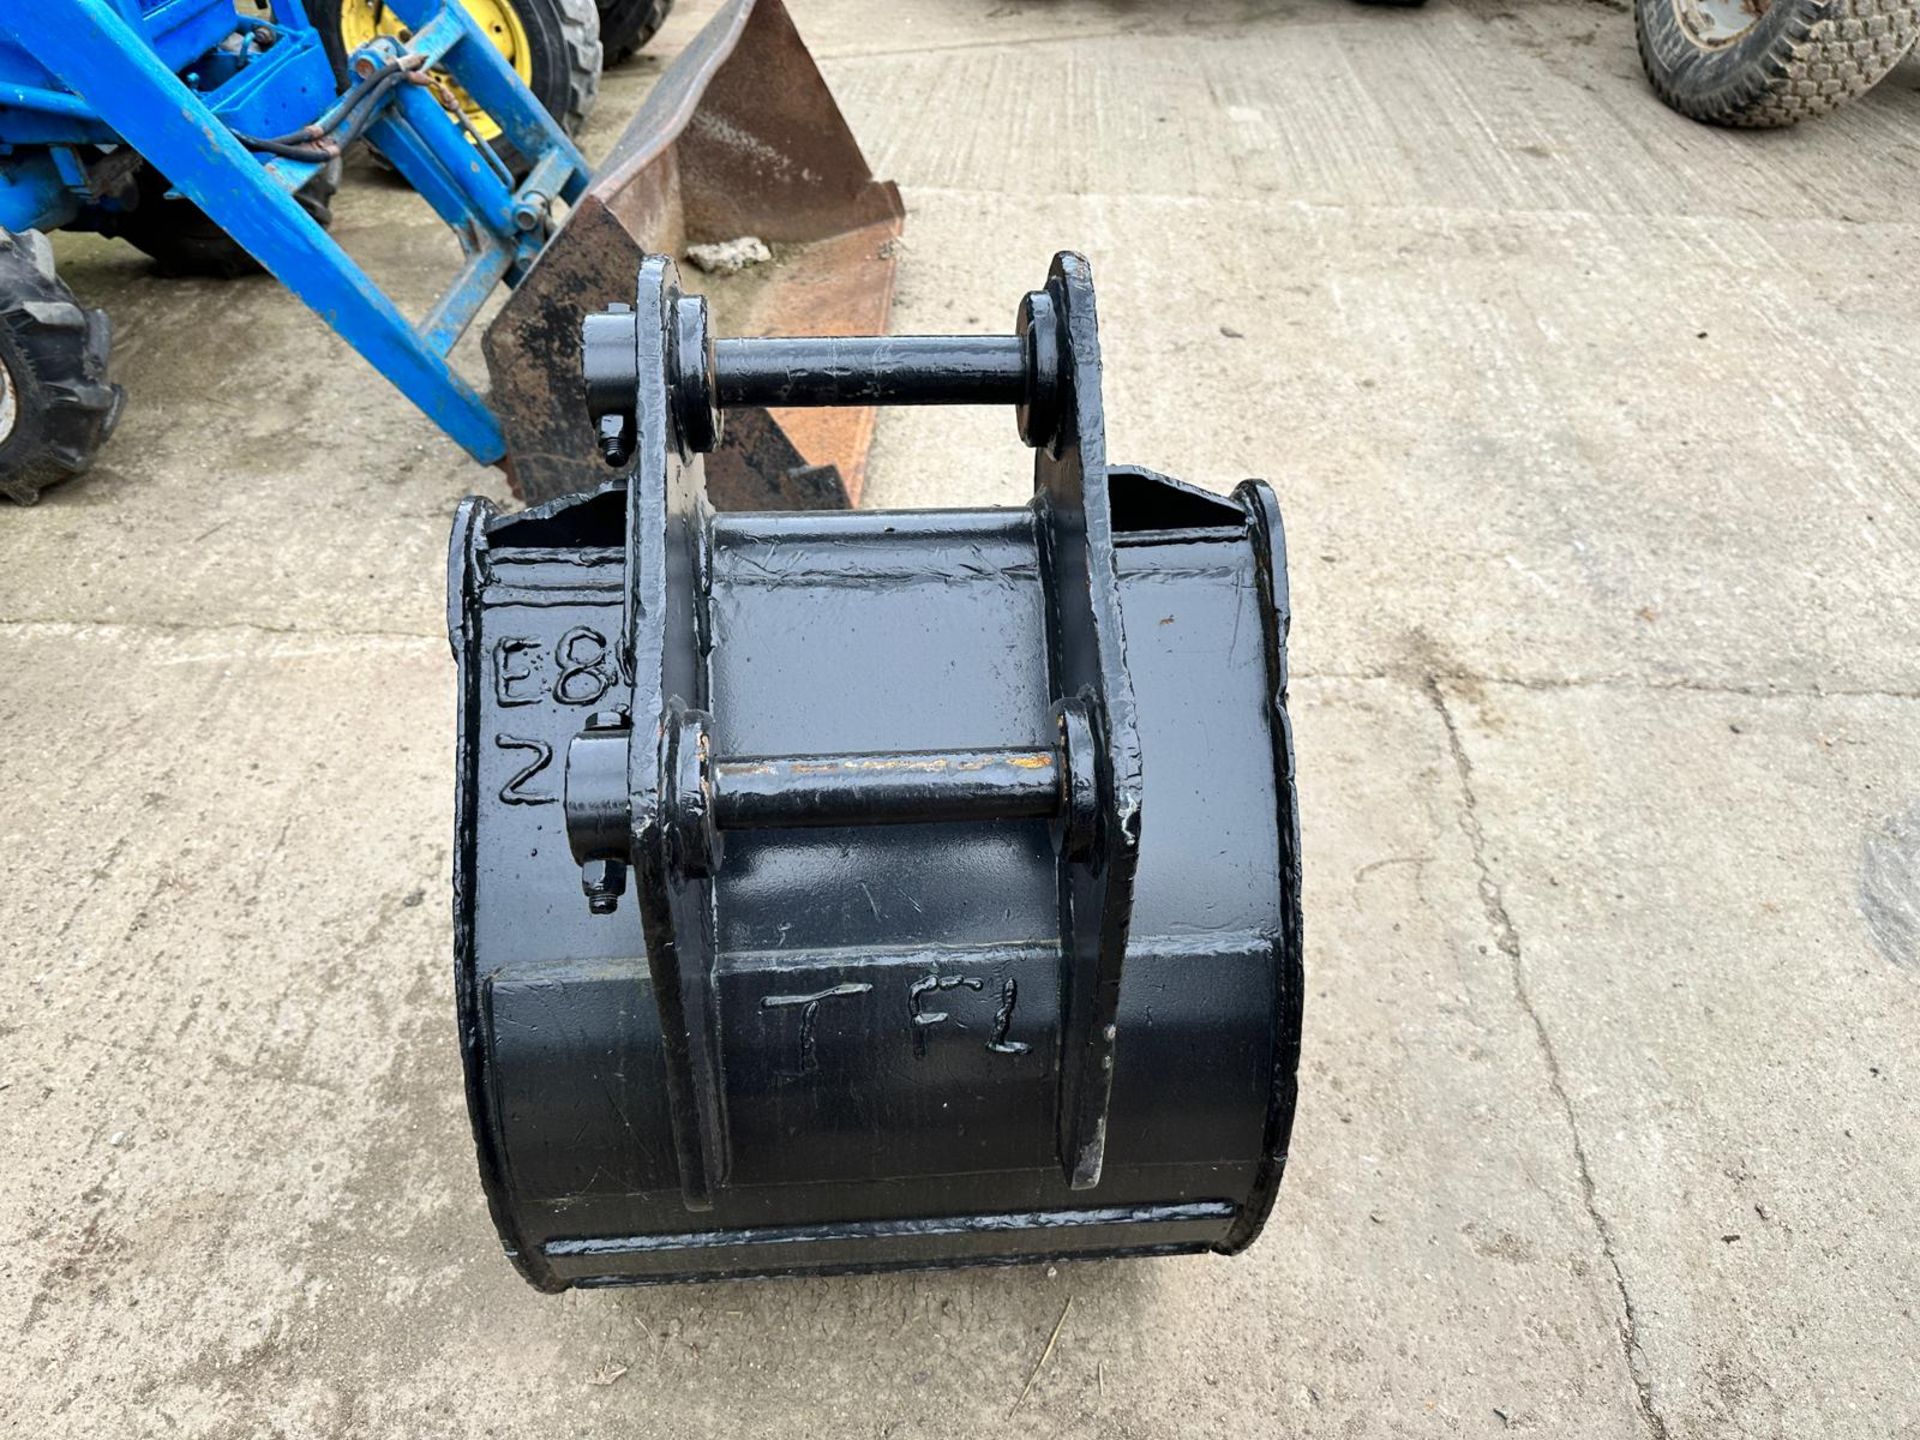 Strickland 24” Digging Bucket With Teeth, Came Of Bobcat E80, Brand New Teeth *PLUS VAT* - Image 2 of 9